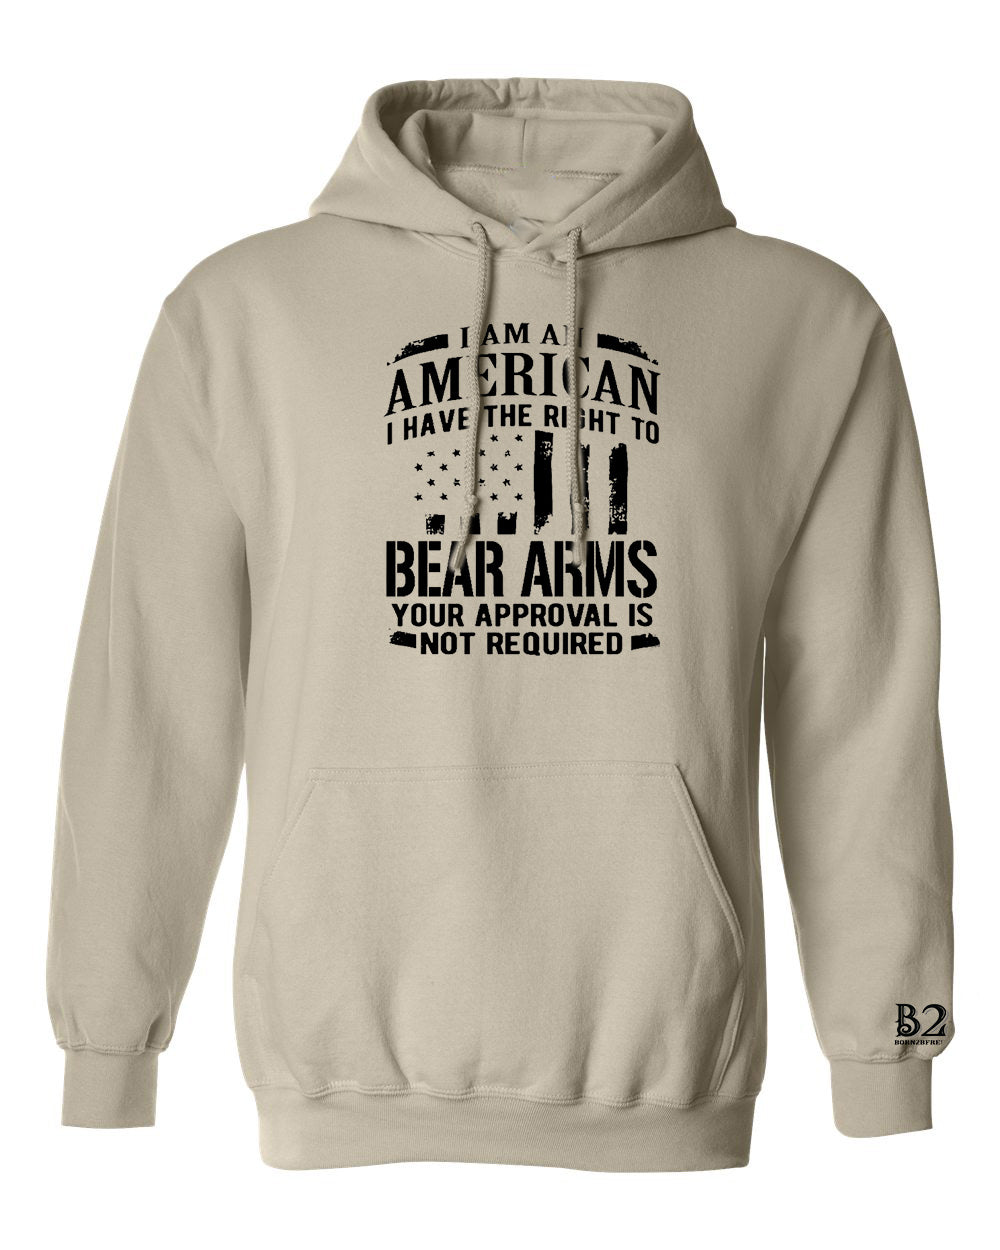 Right To Bear Arms - No Approval